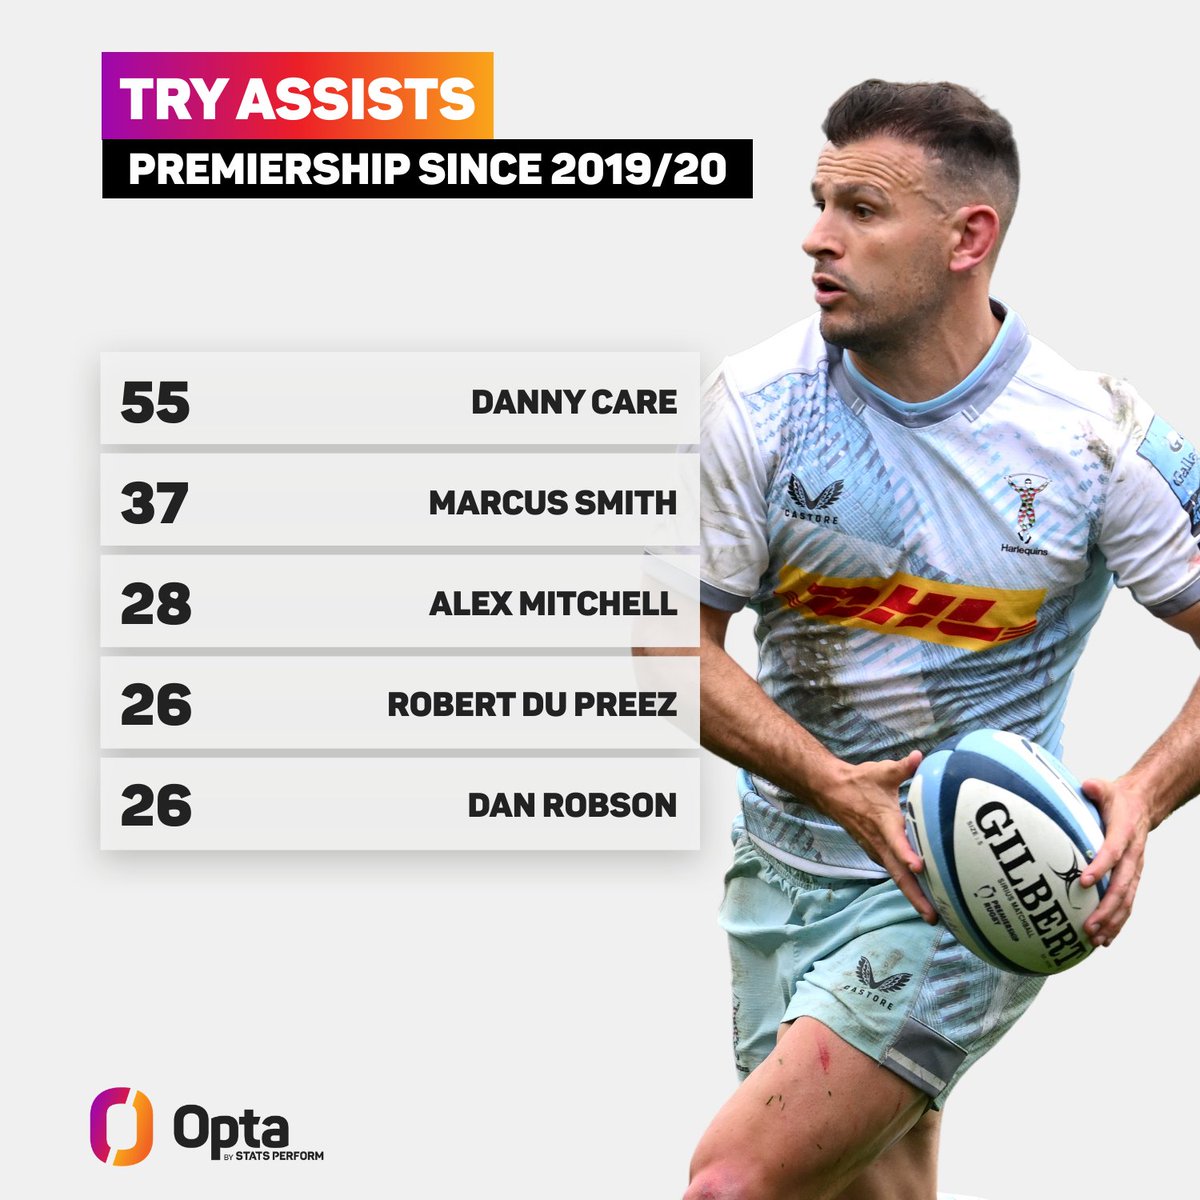 55 - Danny Care has assisted 55 tries in @premrugby since the last @rugbyworldcup - teammate Marcus Smith (37) is the only other player with 30+ assists; Care has also scored 23 tries in that period, with his total of 78 try involvements also being the most of any player. Merit.